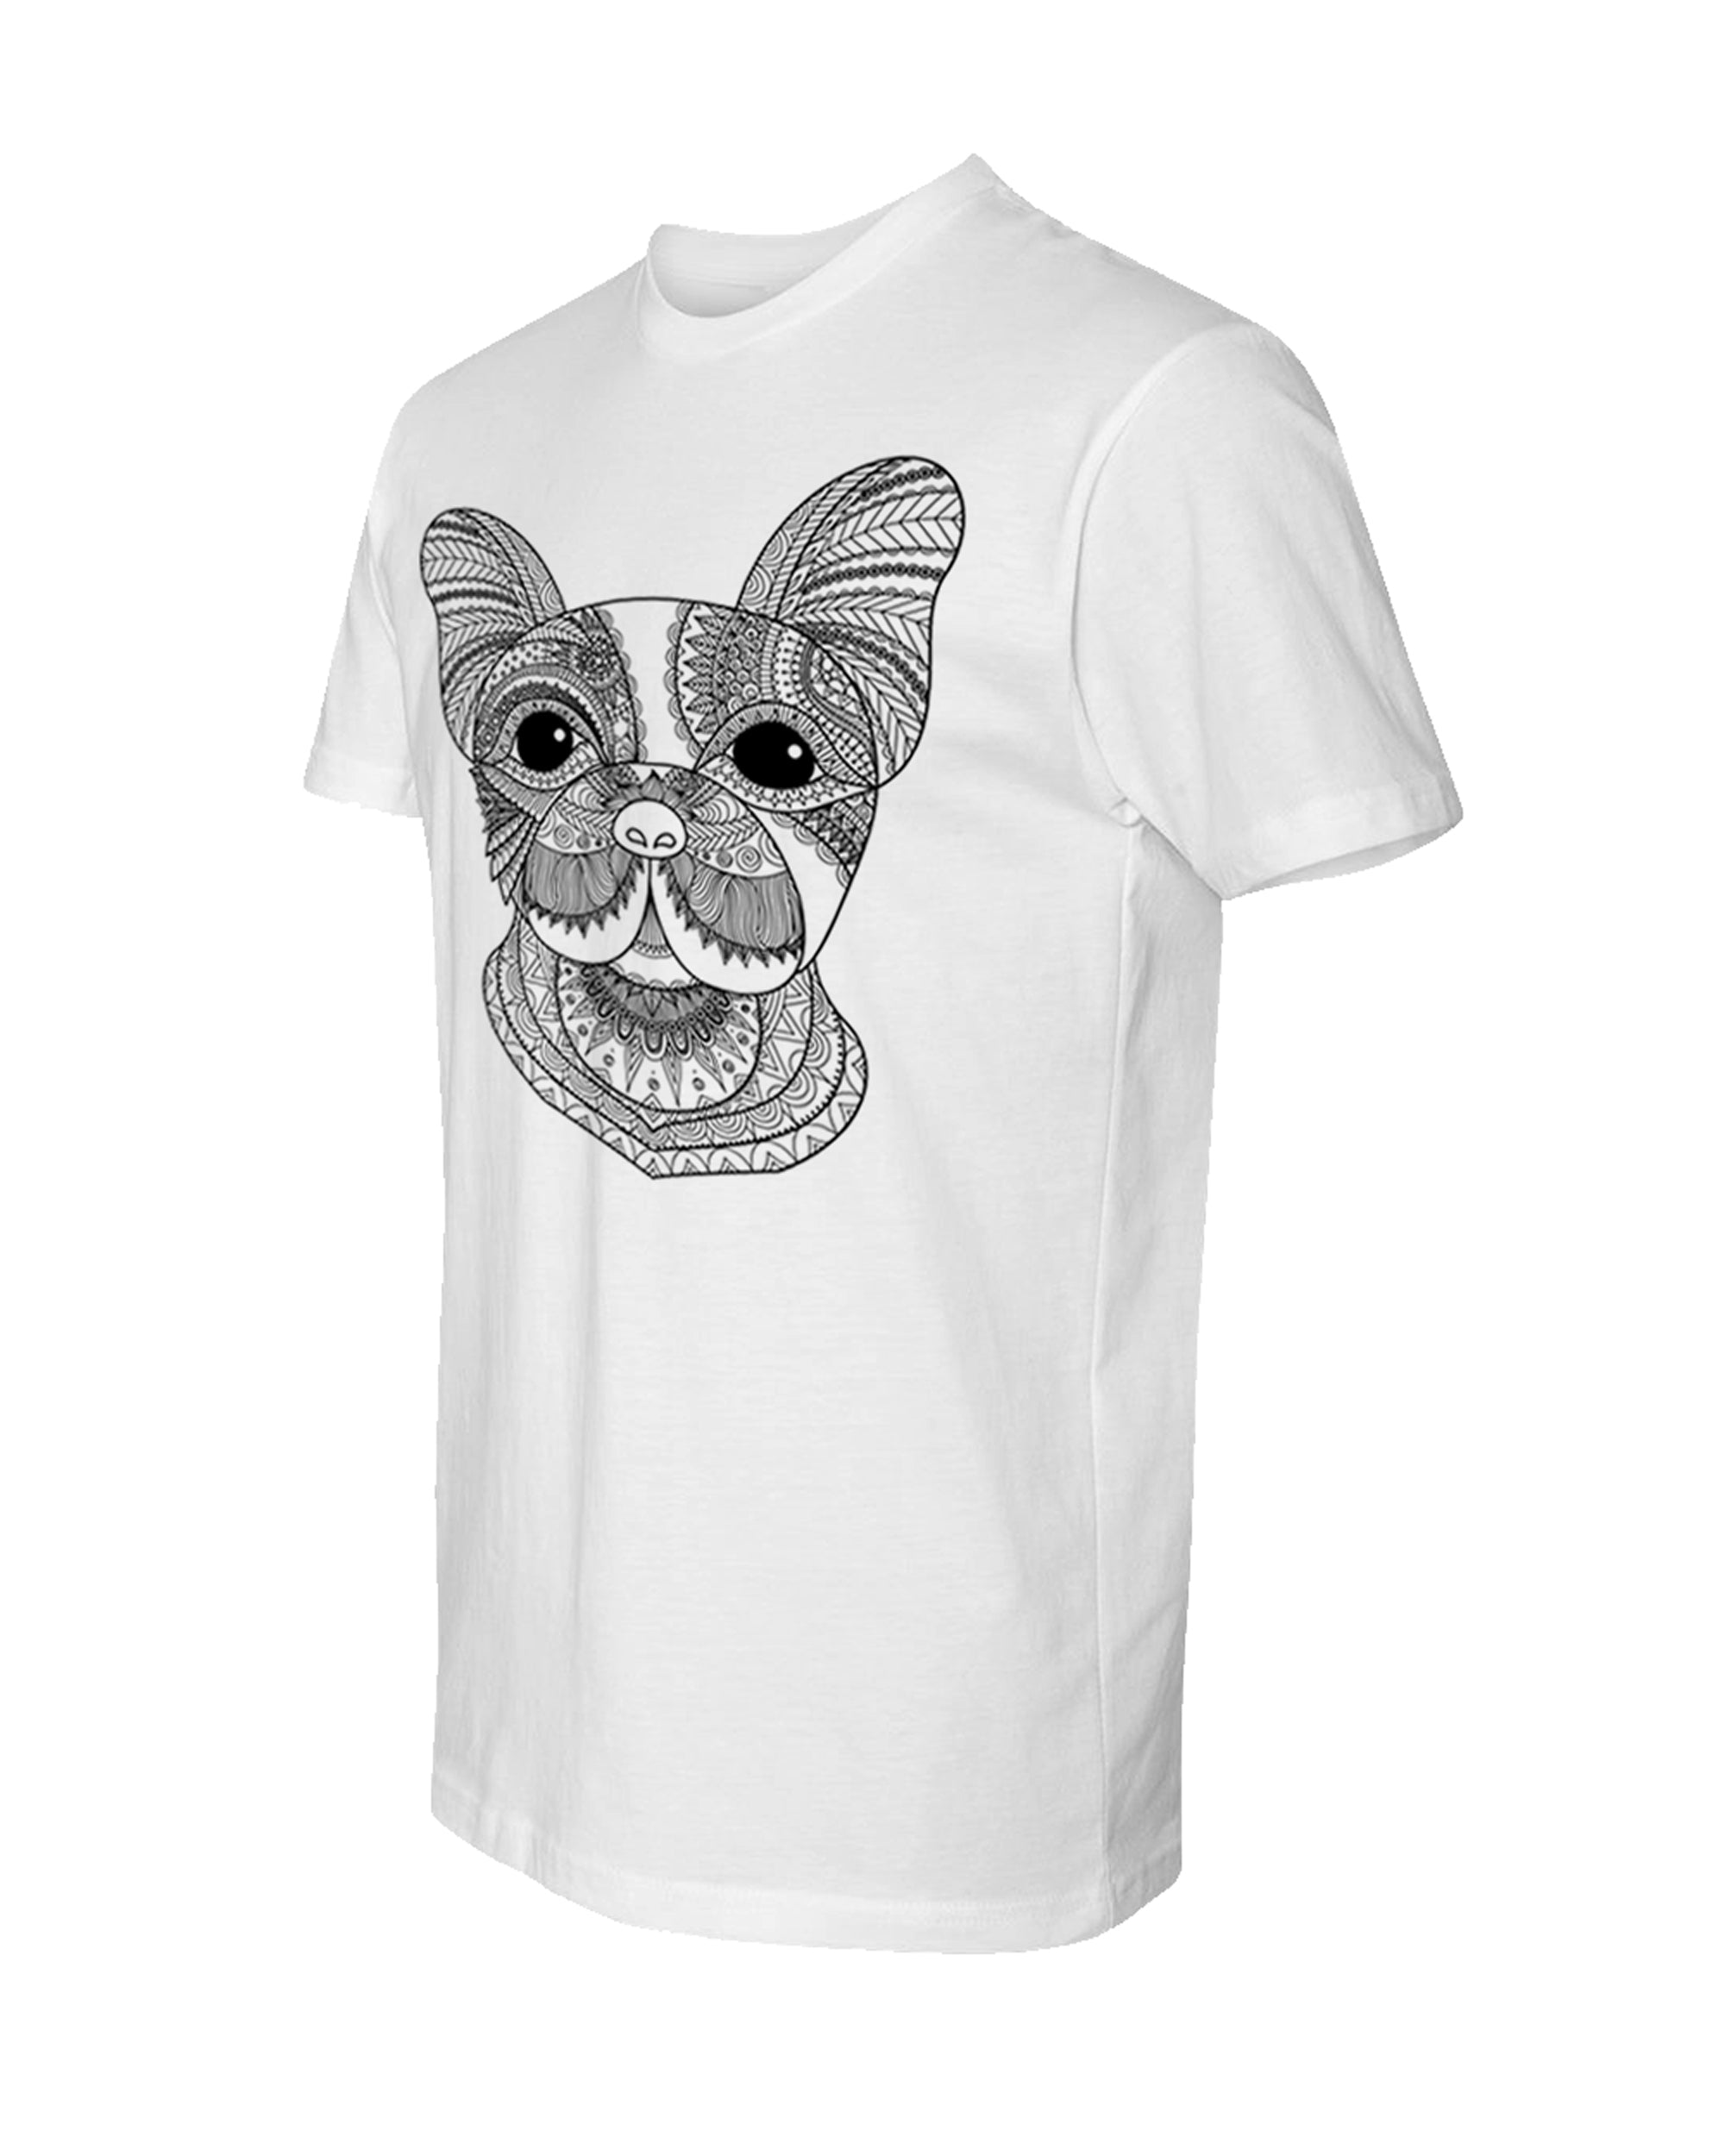 Men's Coloring Dog White T Shirt - Adorned By You